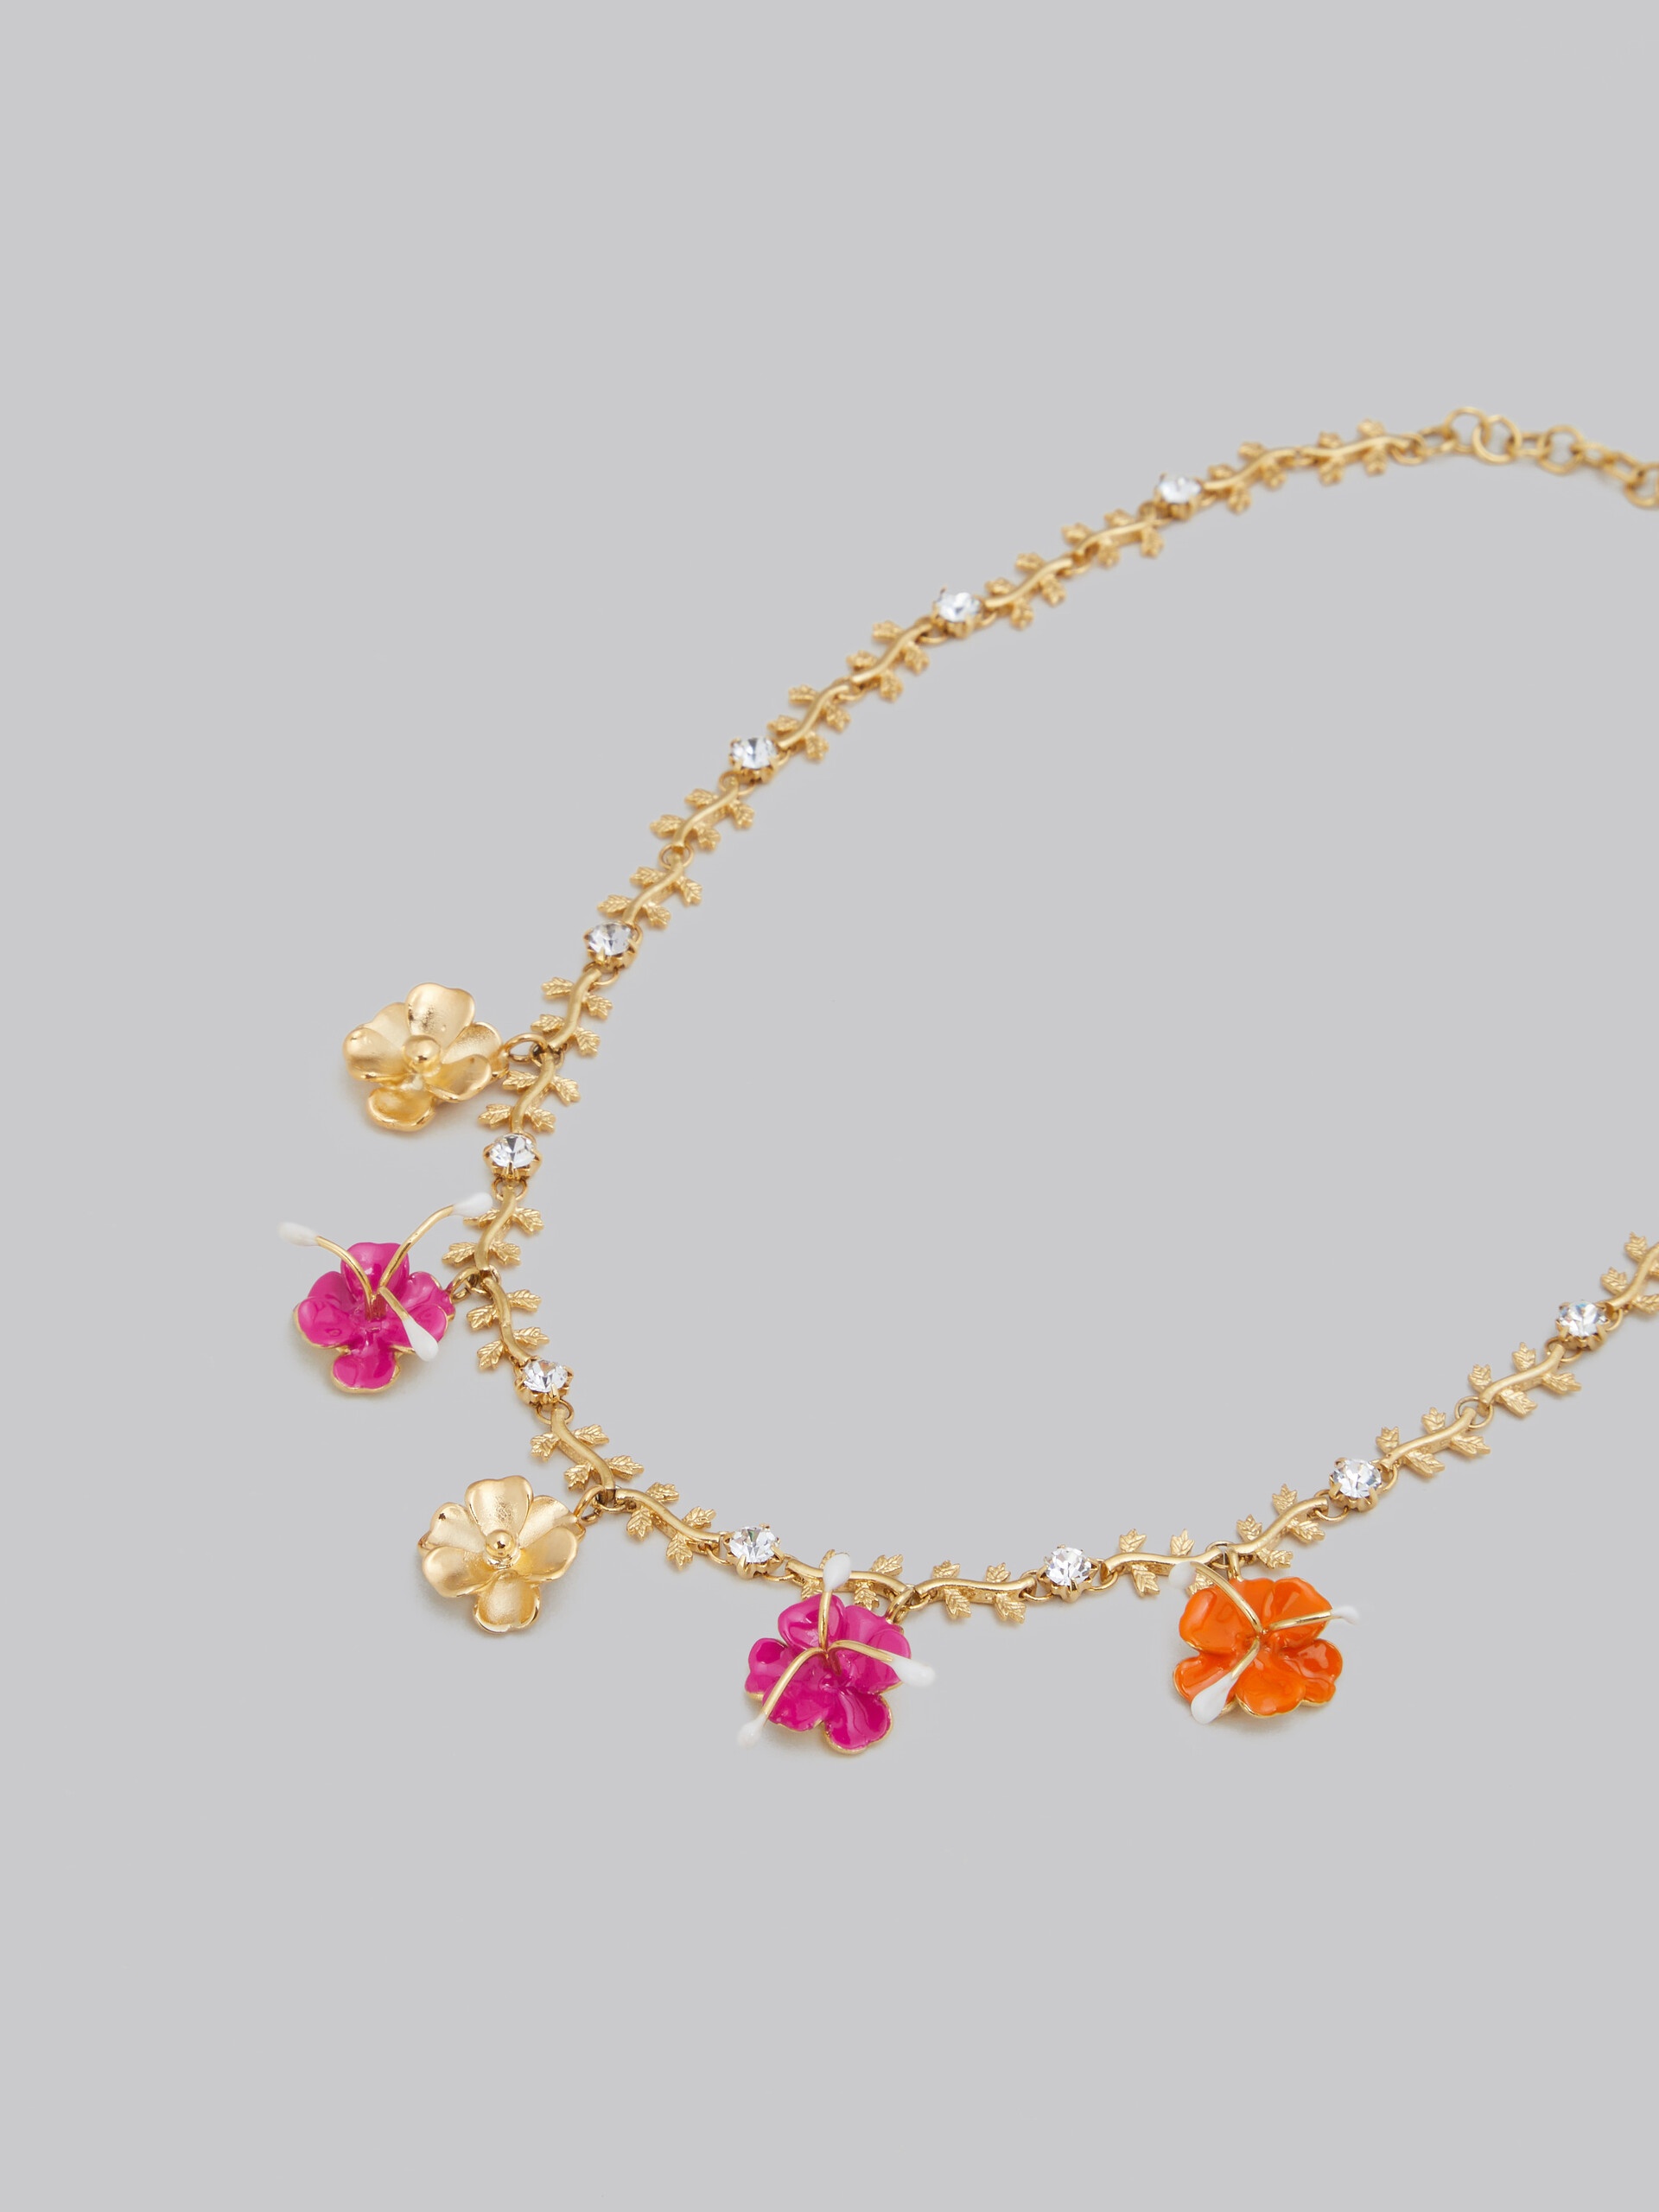 ENAMELLED FLOWER CHARM NECKLACE - 3